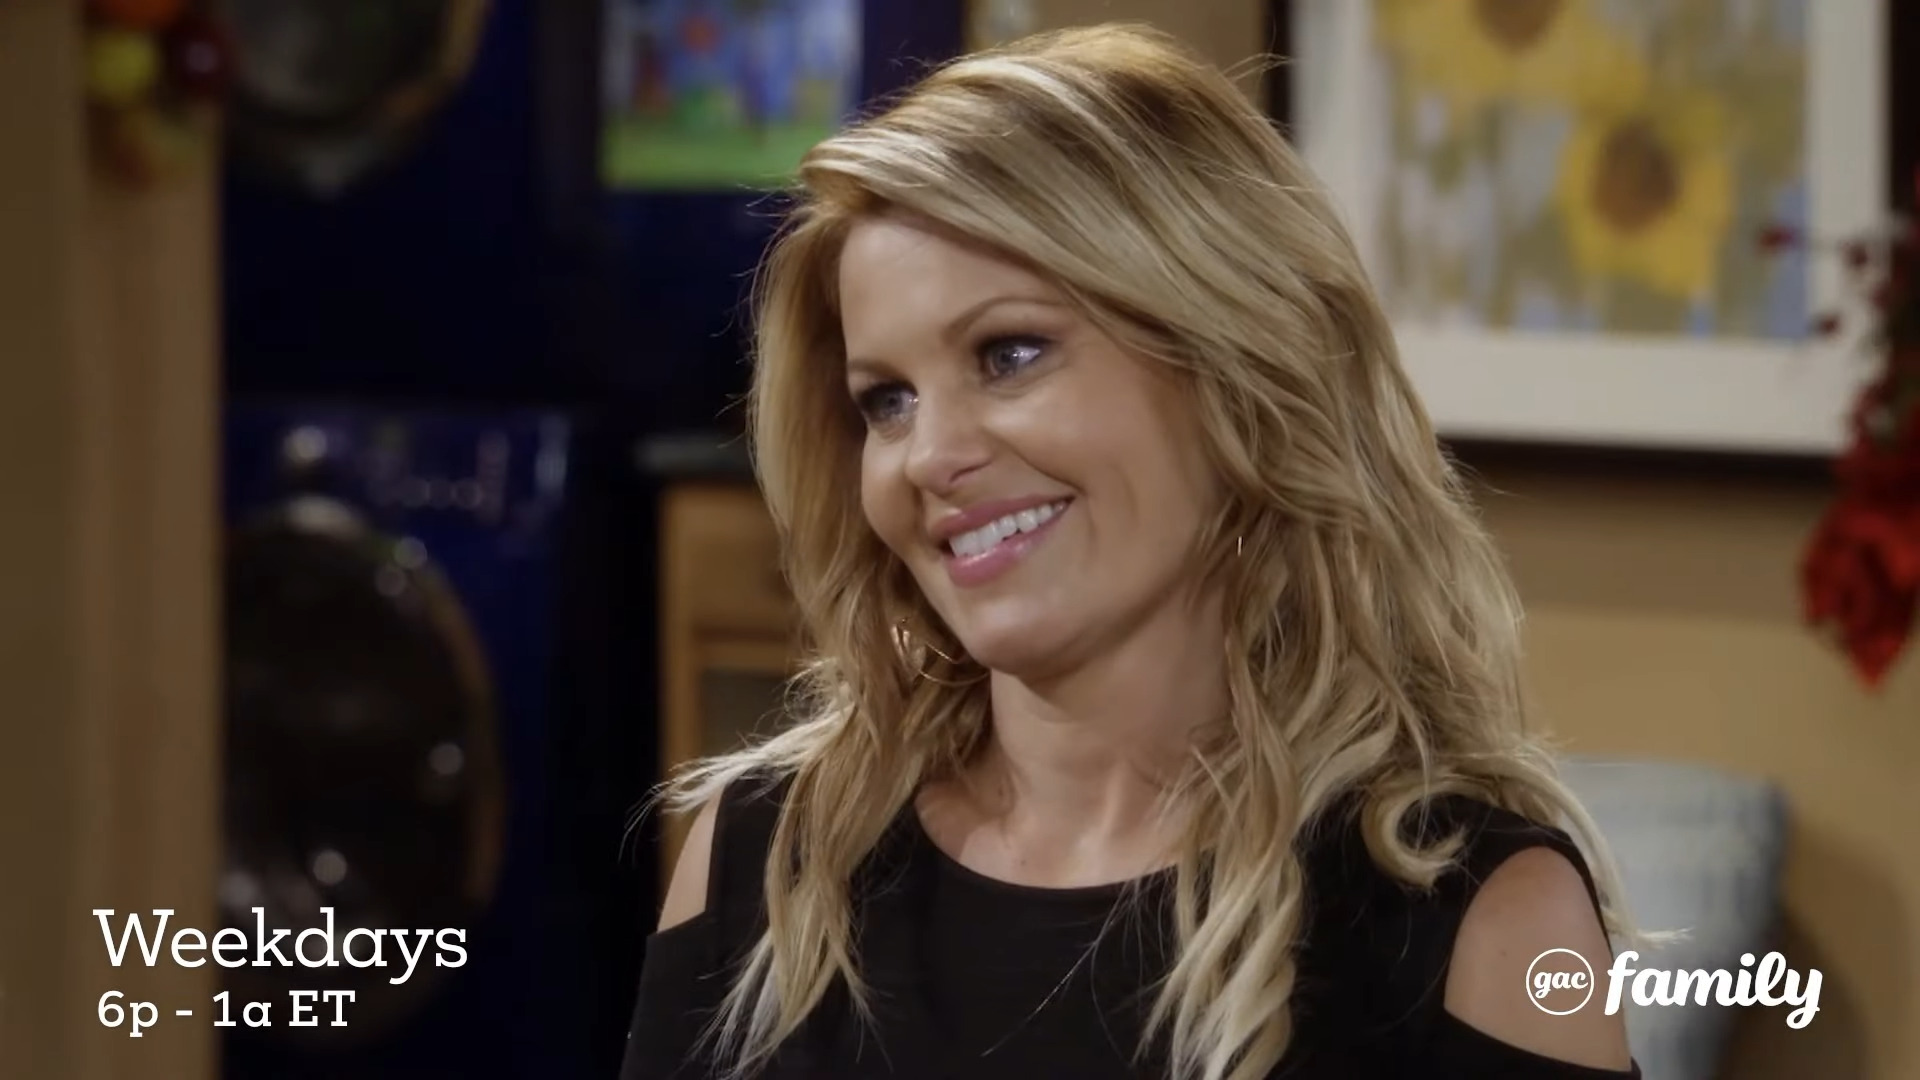 Candace Cameron Bure appears in a promo for Great American Family